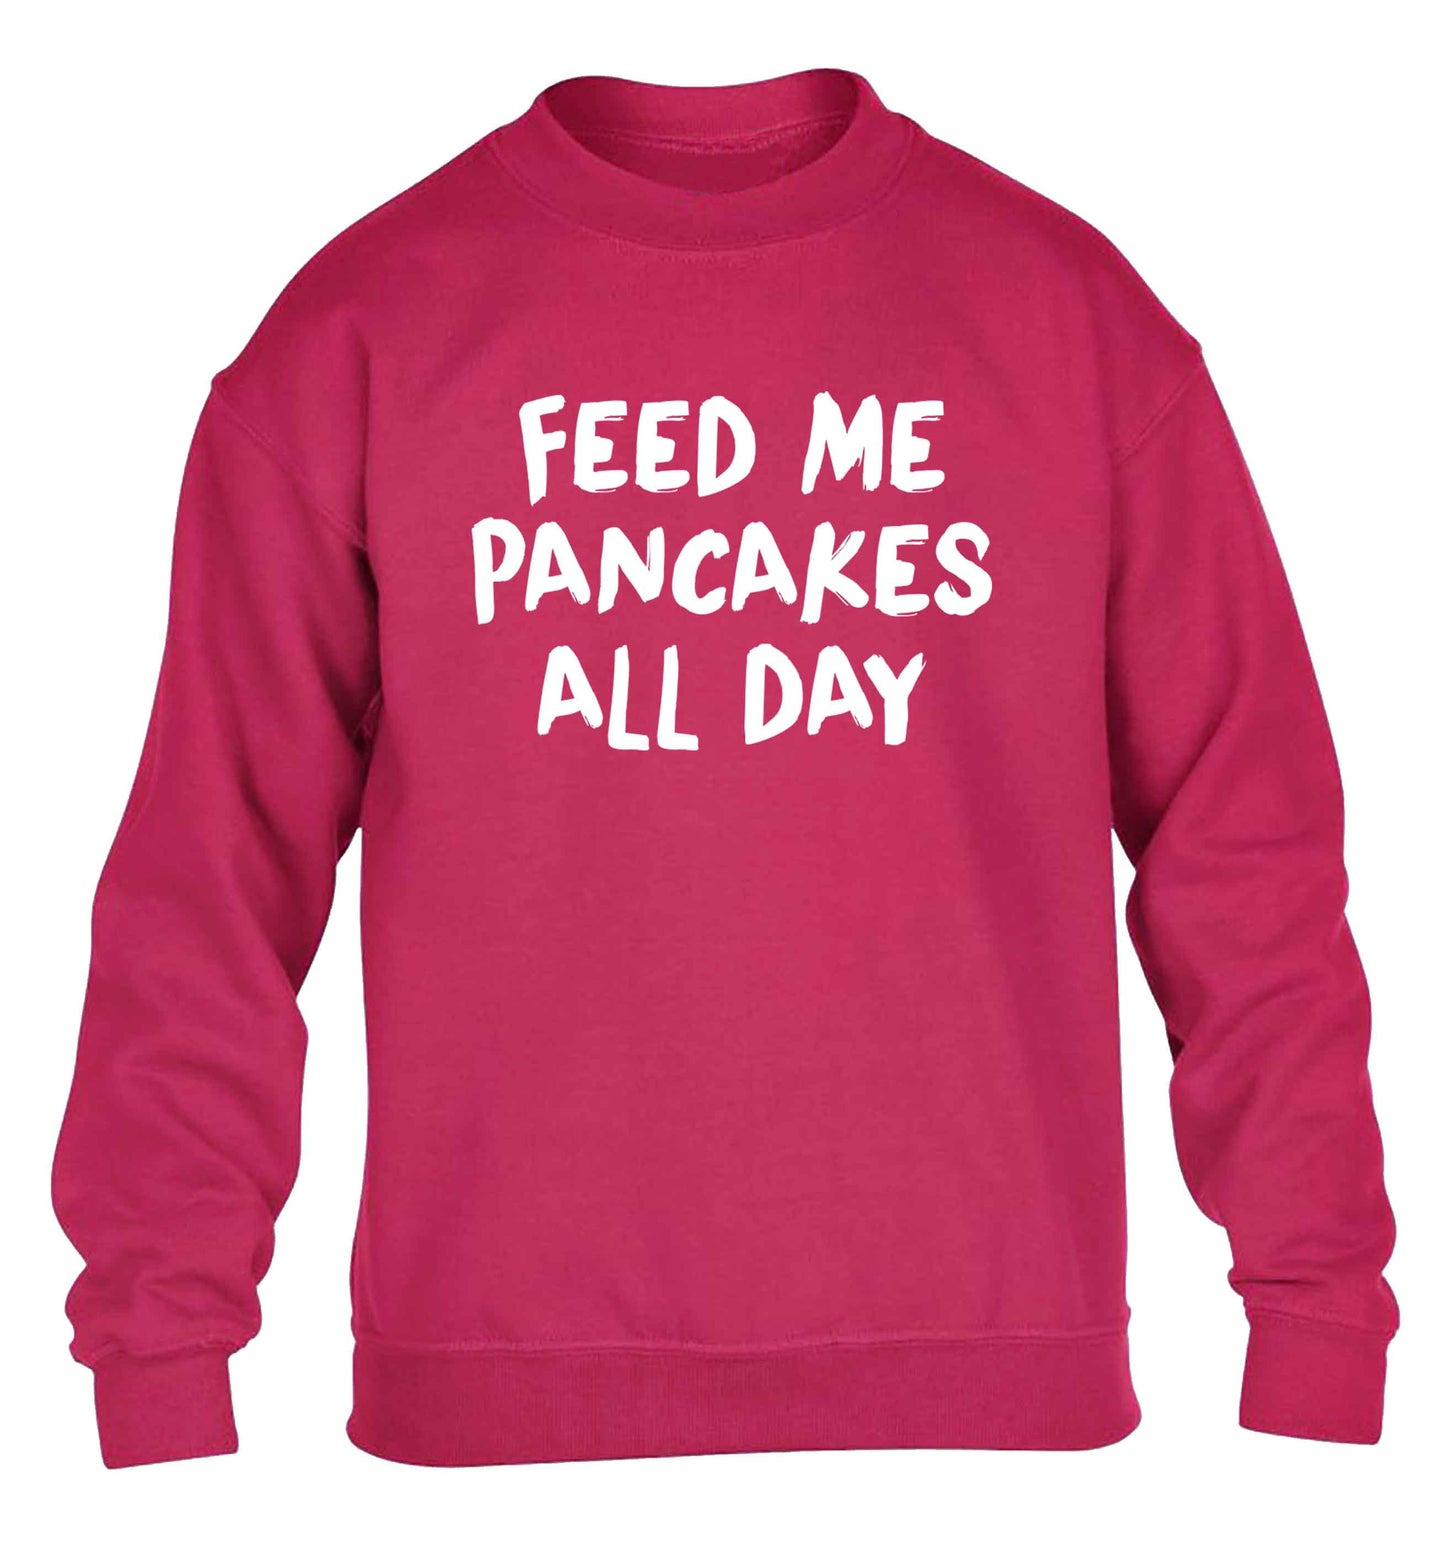 Feed me pancakes all day children's pink sweater 12-13 Years